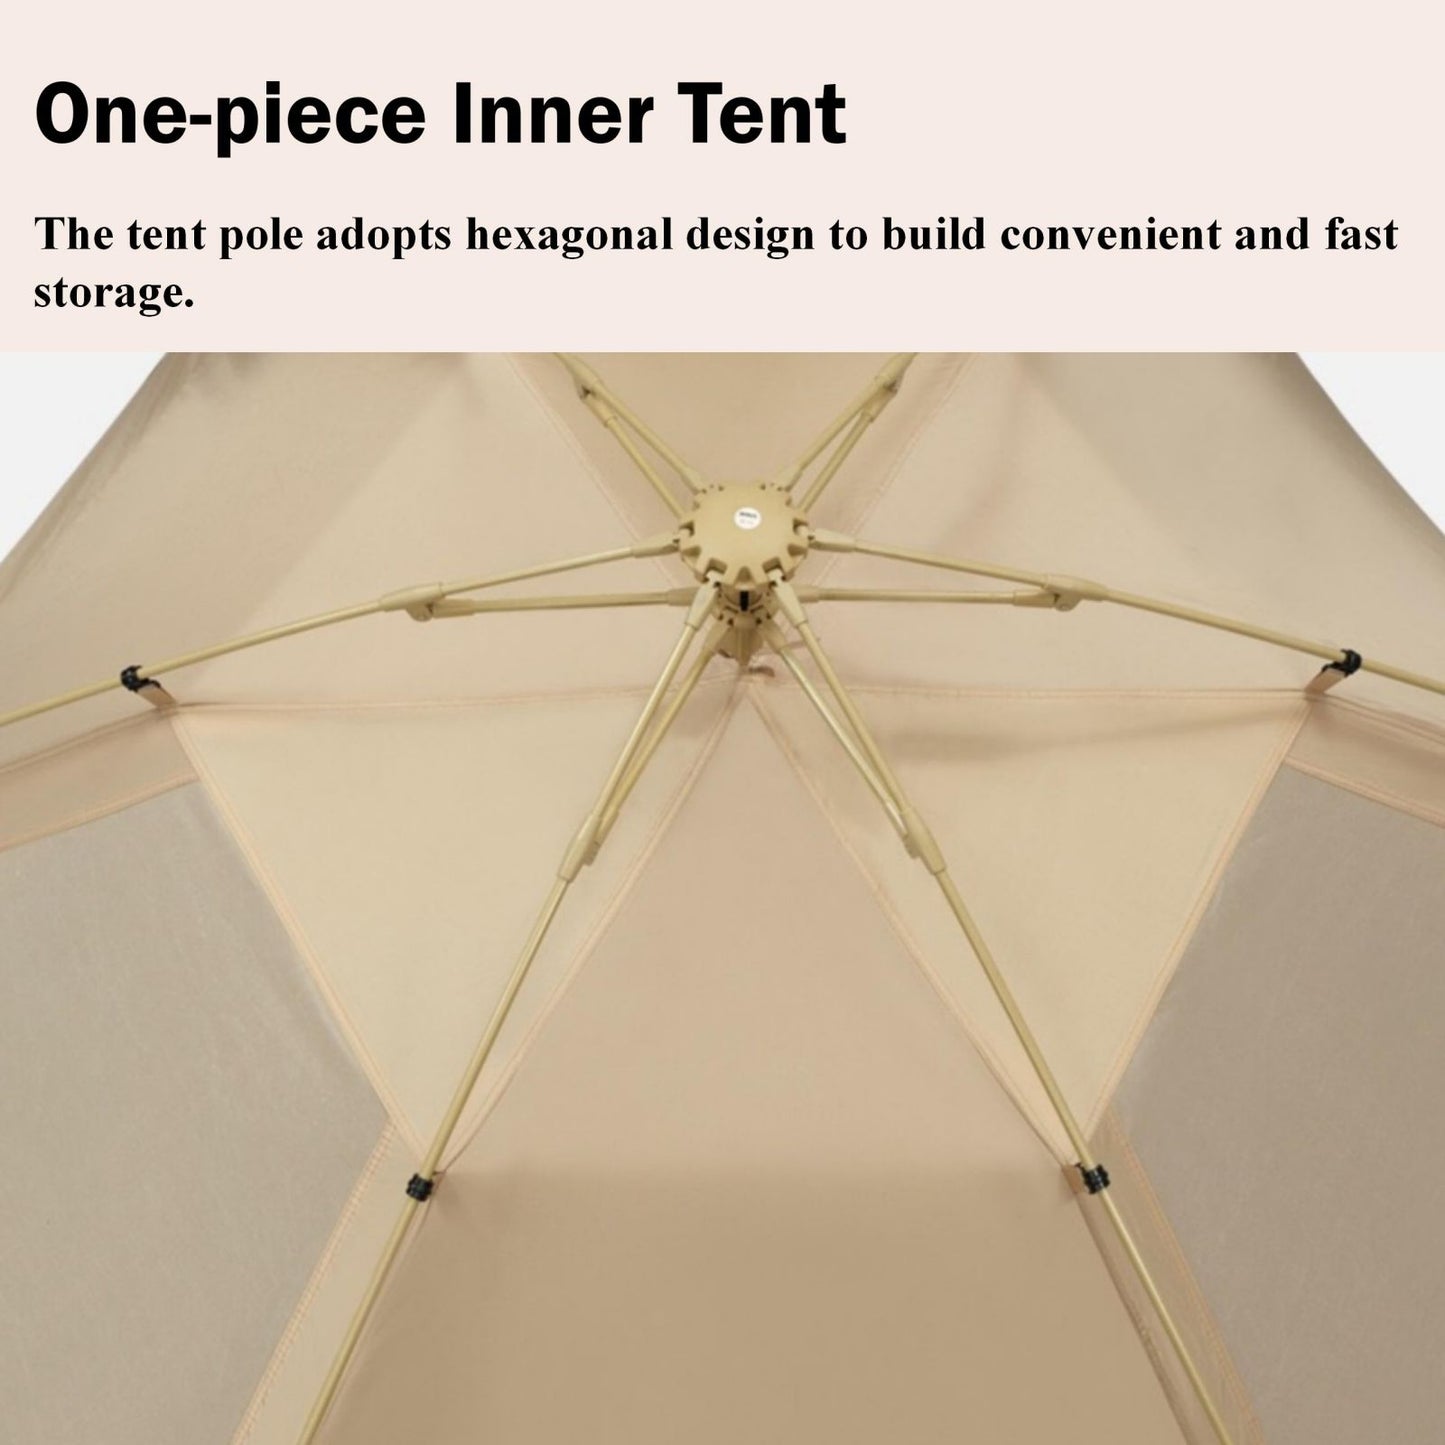 Large Space Luxury Frog Hexagonal Tent 5-8 Person Double Layer - Green